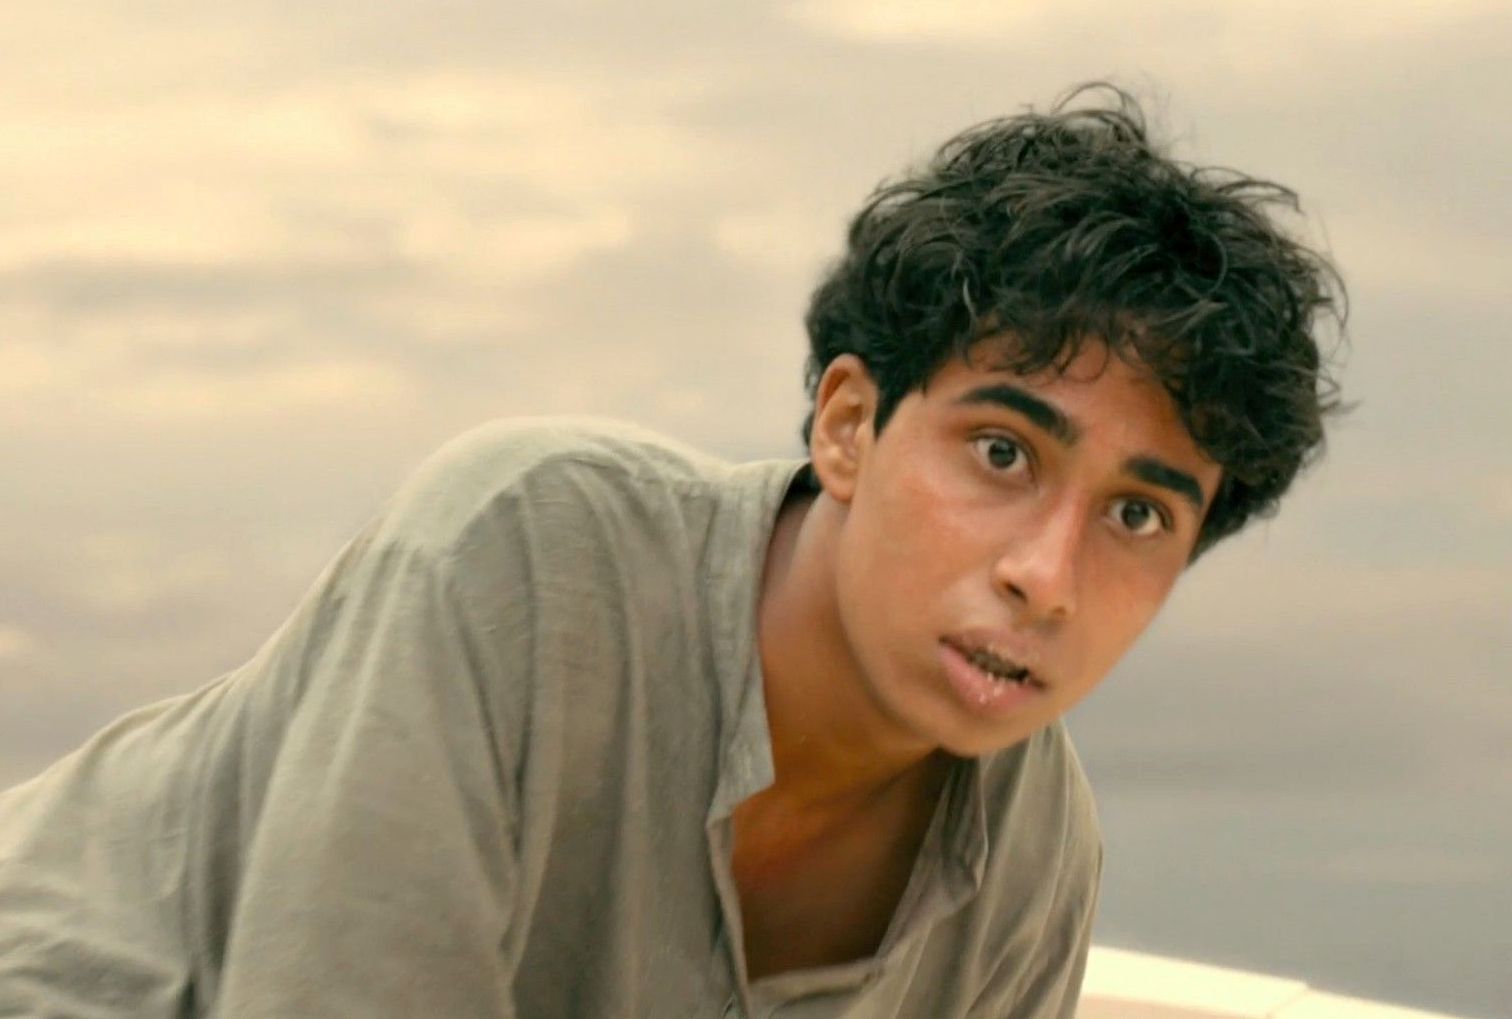 The Film Sufi “Life of Pi” Ang Lee (2012)